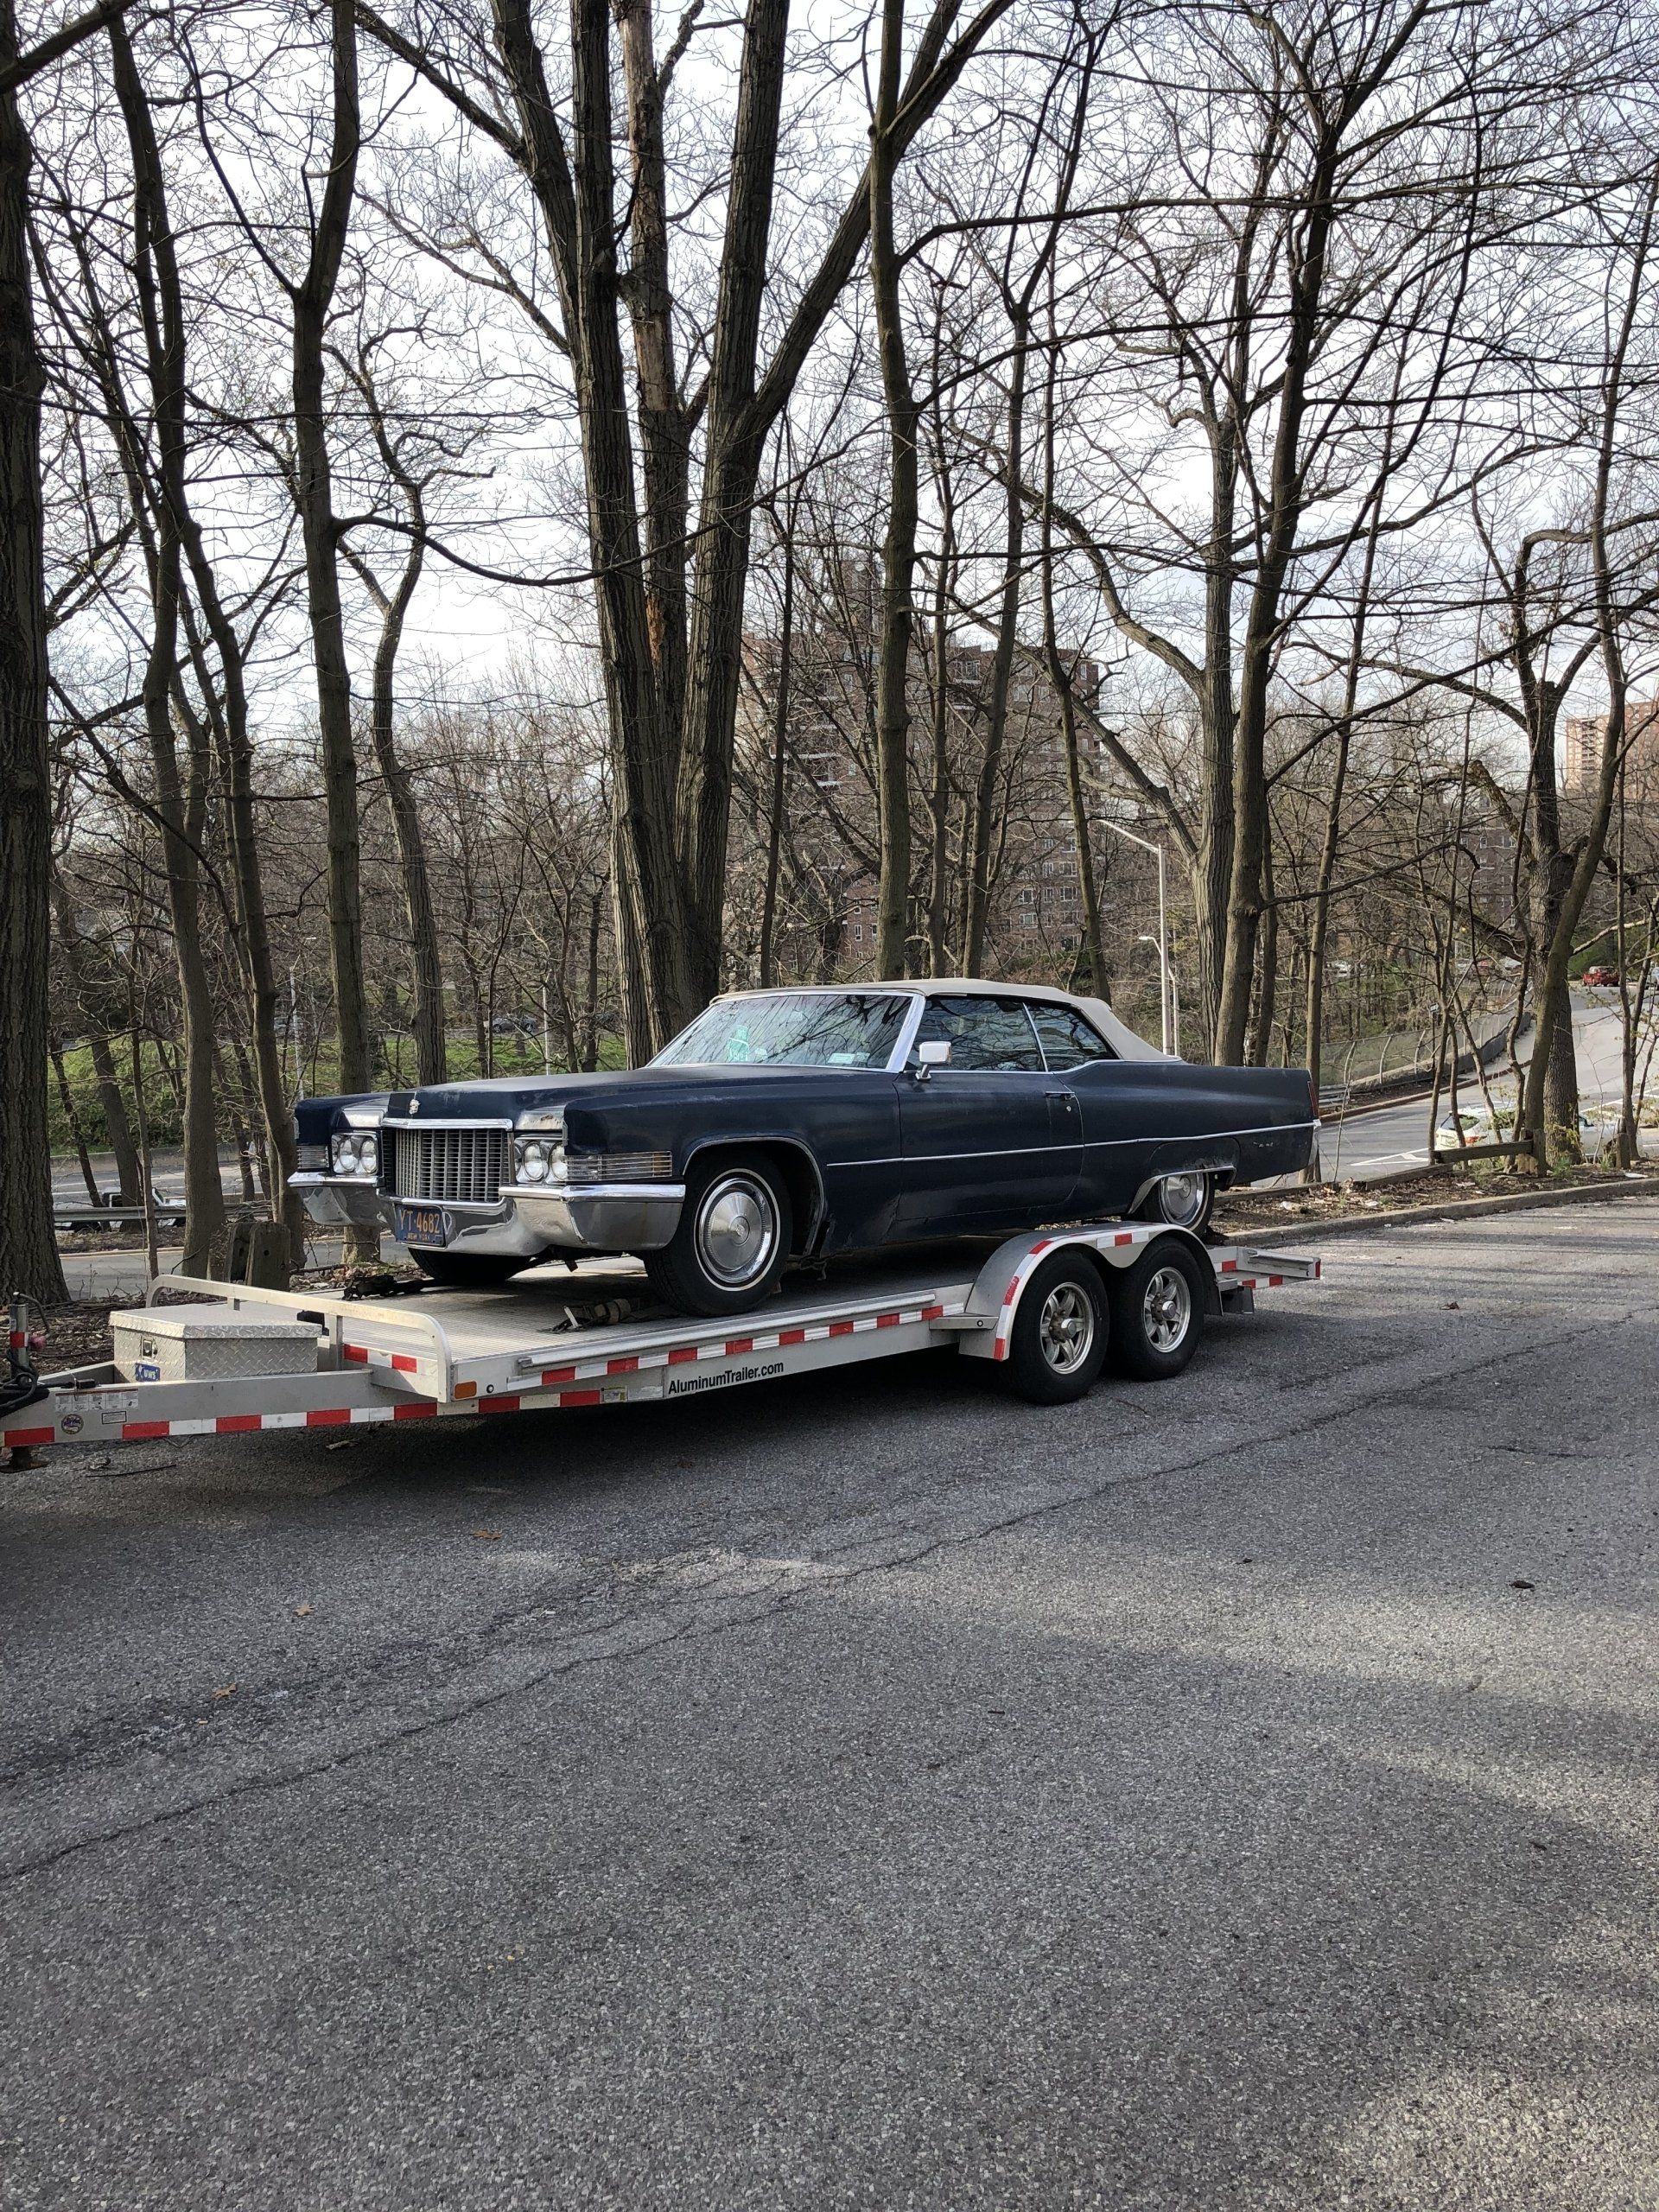 car is being towed | Autolink Repair Services